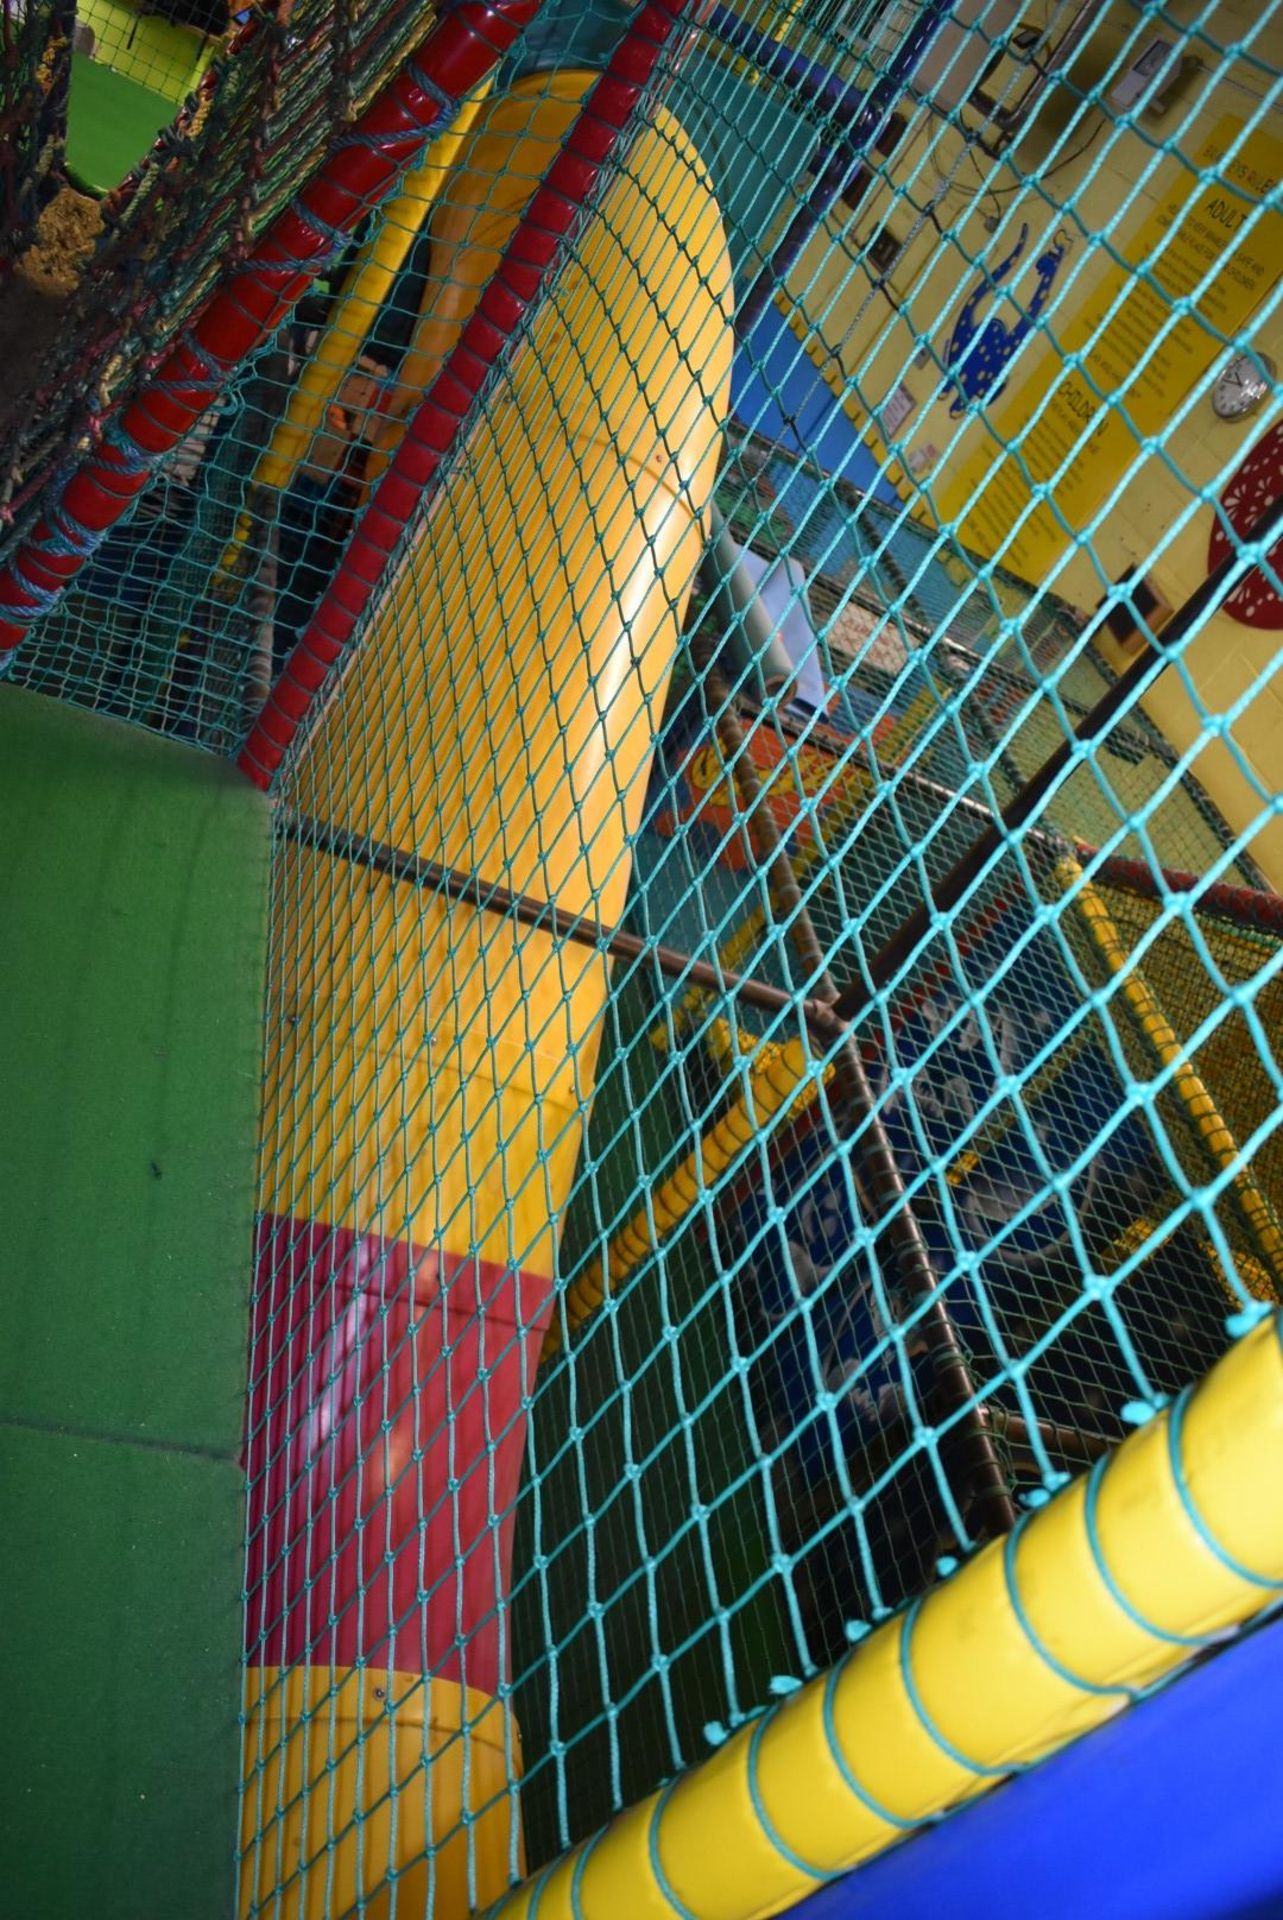 Bramleys Big Adventure Playground - Giant Action-Packed Playcentre With Slides, Zip Line Swings, - Image 44 of 128